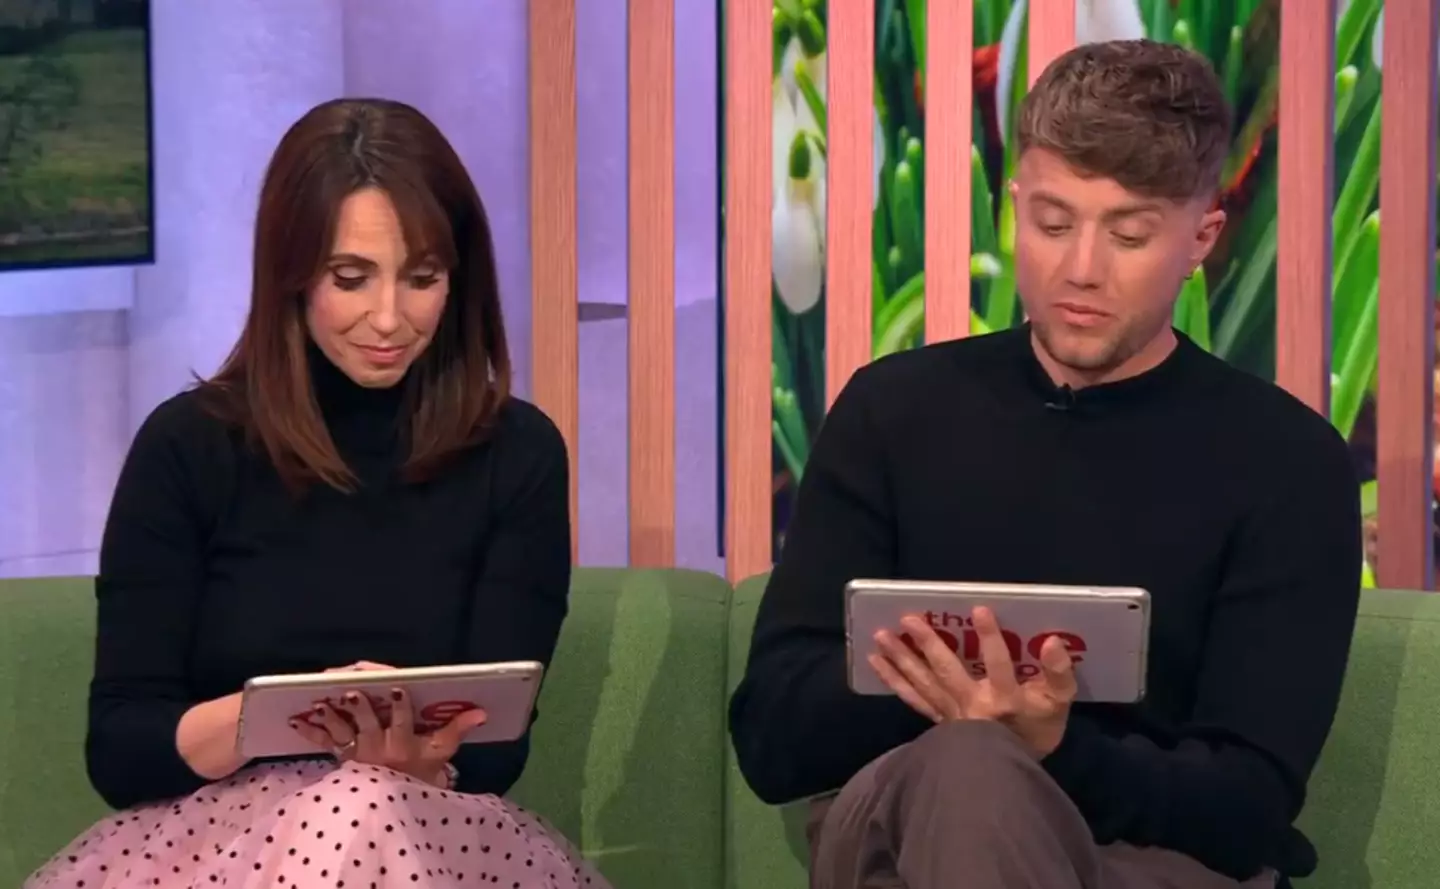 The pair also read tributes from viewers.